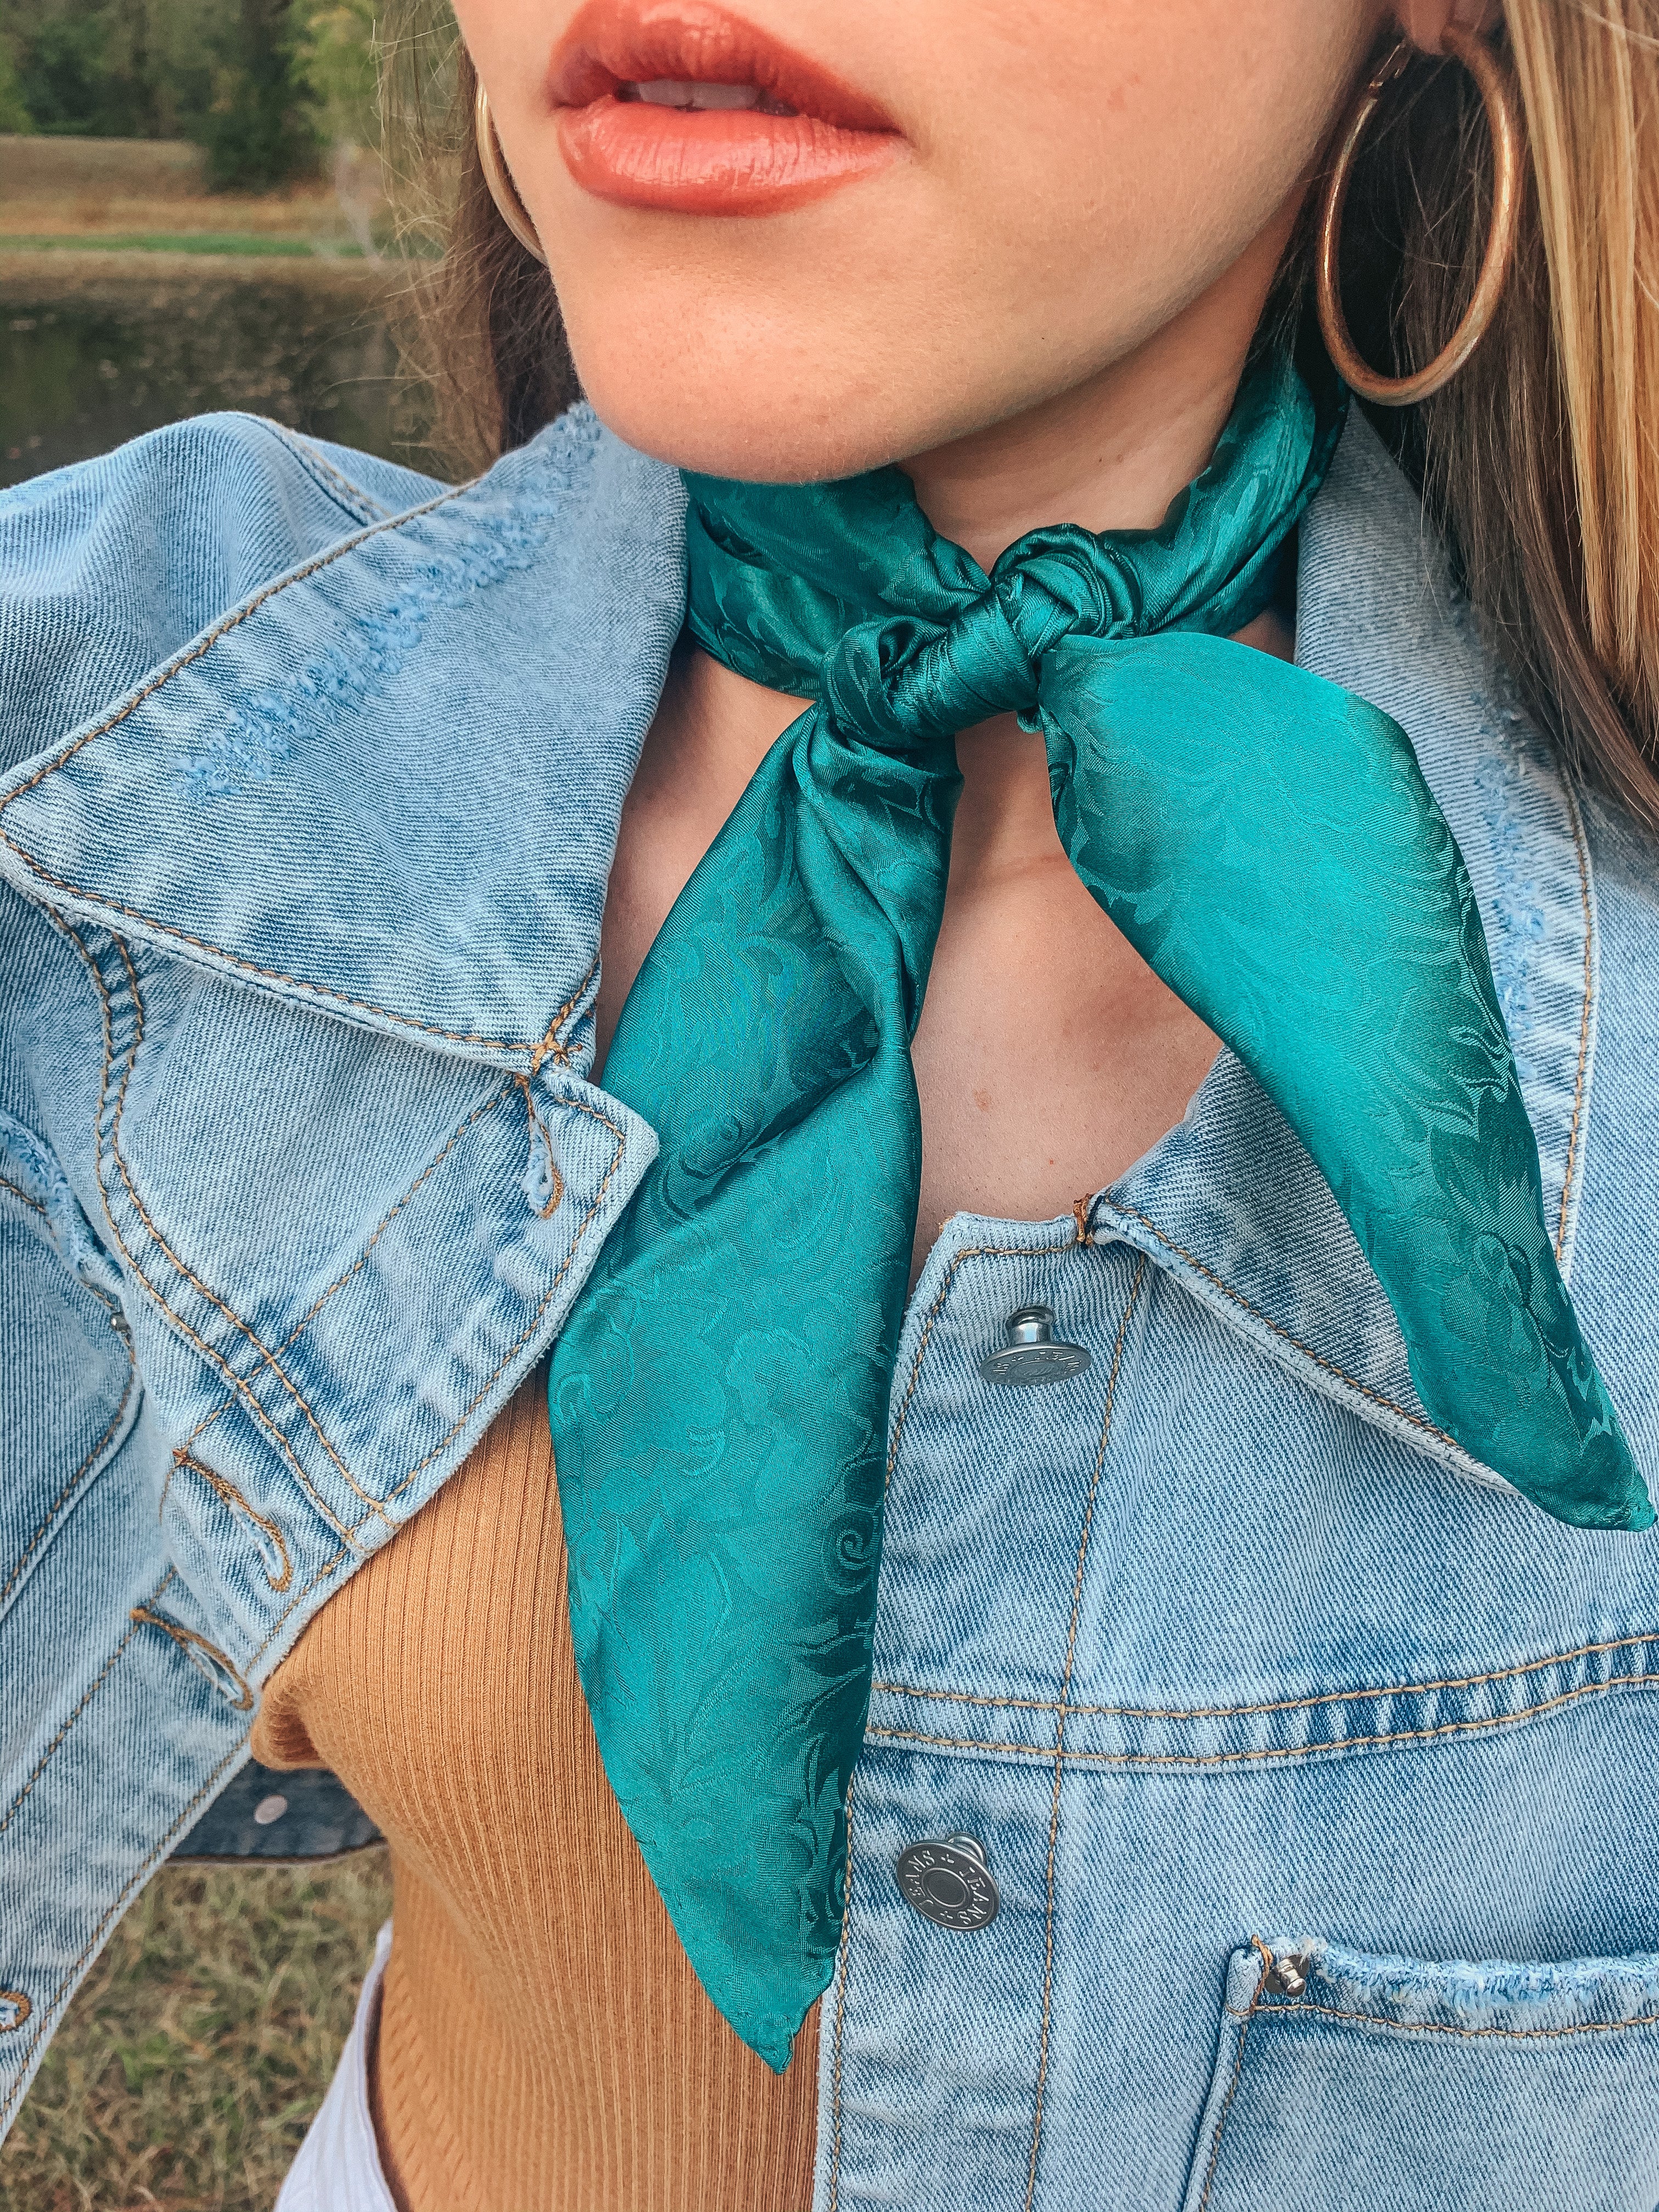 Mini Jacquard Wild Rag in Teal - Giddy Up Glamour Boutique